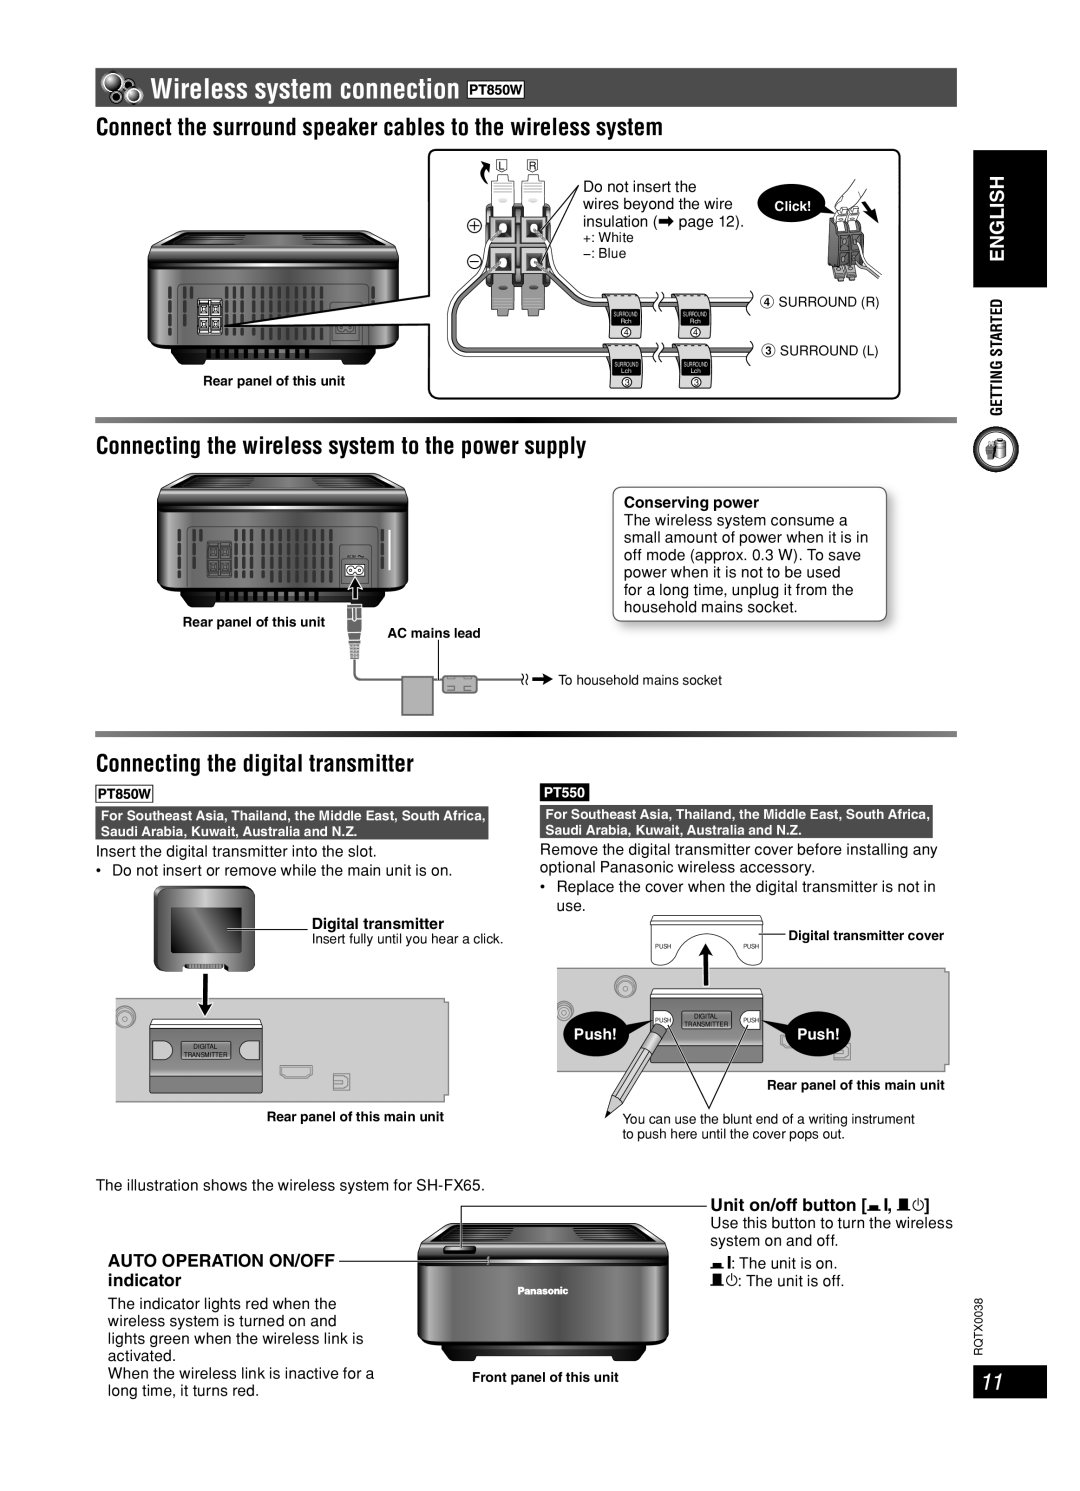 Panasonic SC-PT850 Wireless system connection, Connecting the digital transmitter, AUTO OPERATION ON/OFF indicator, Push 